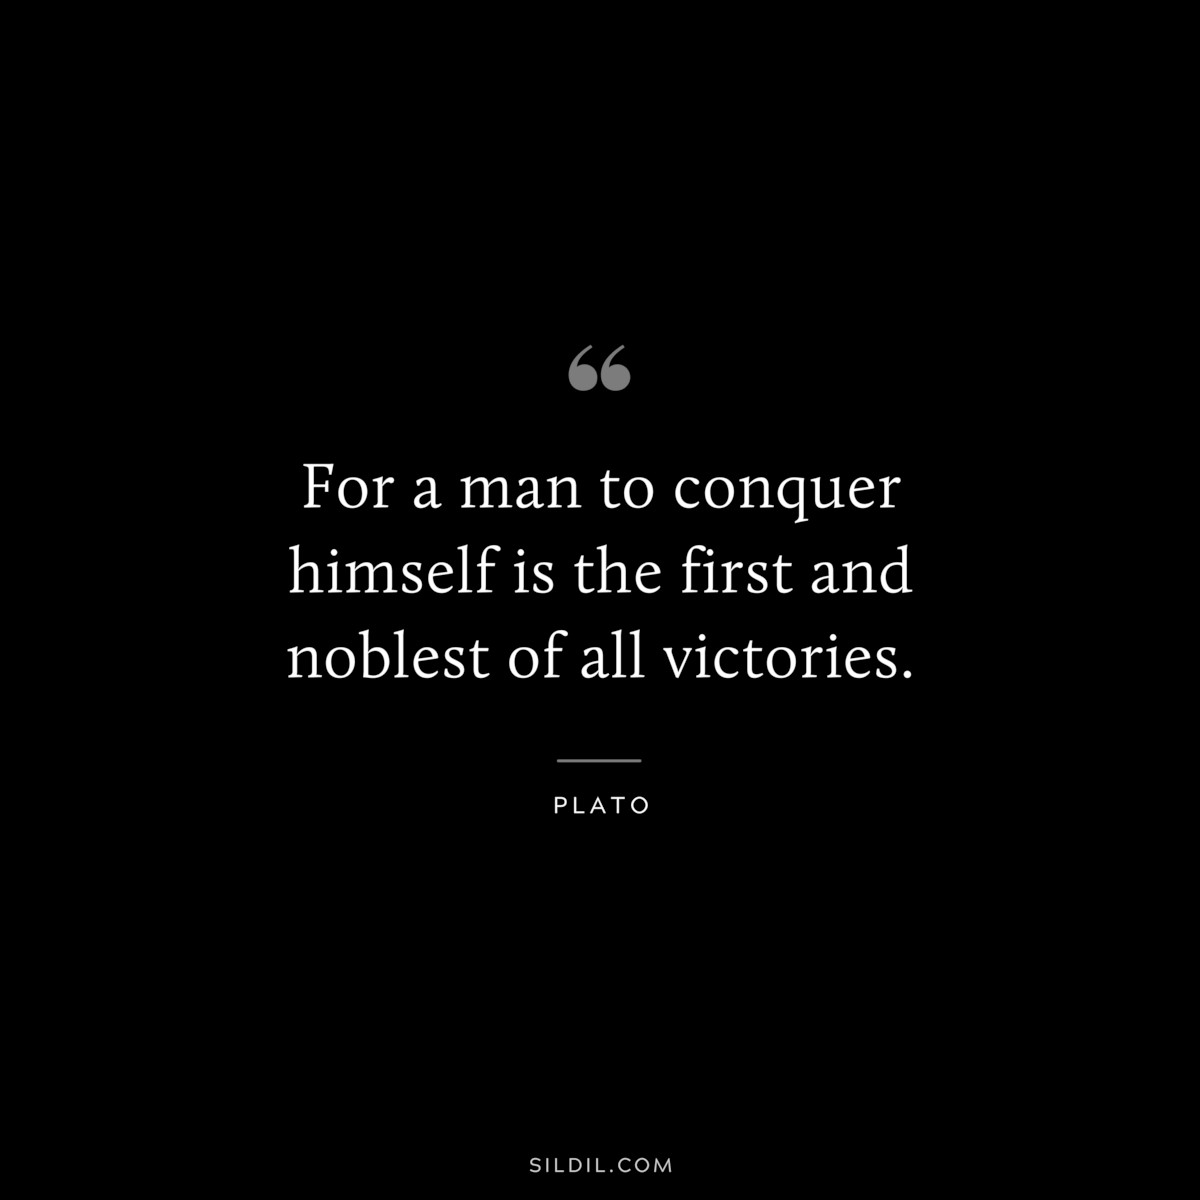 For a man to conquer himself is the first and noblest of all victories. ― Plato